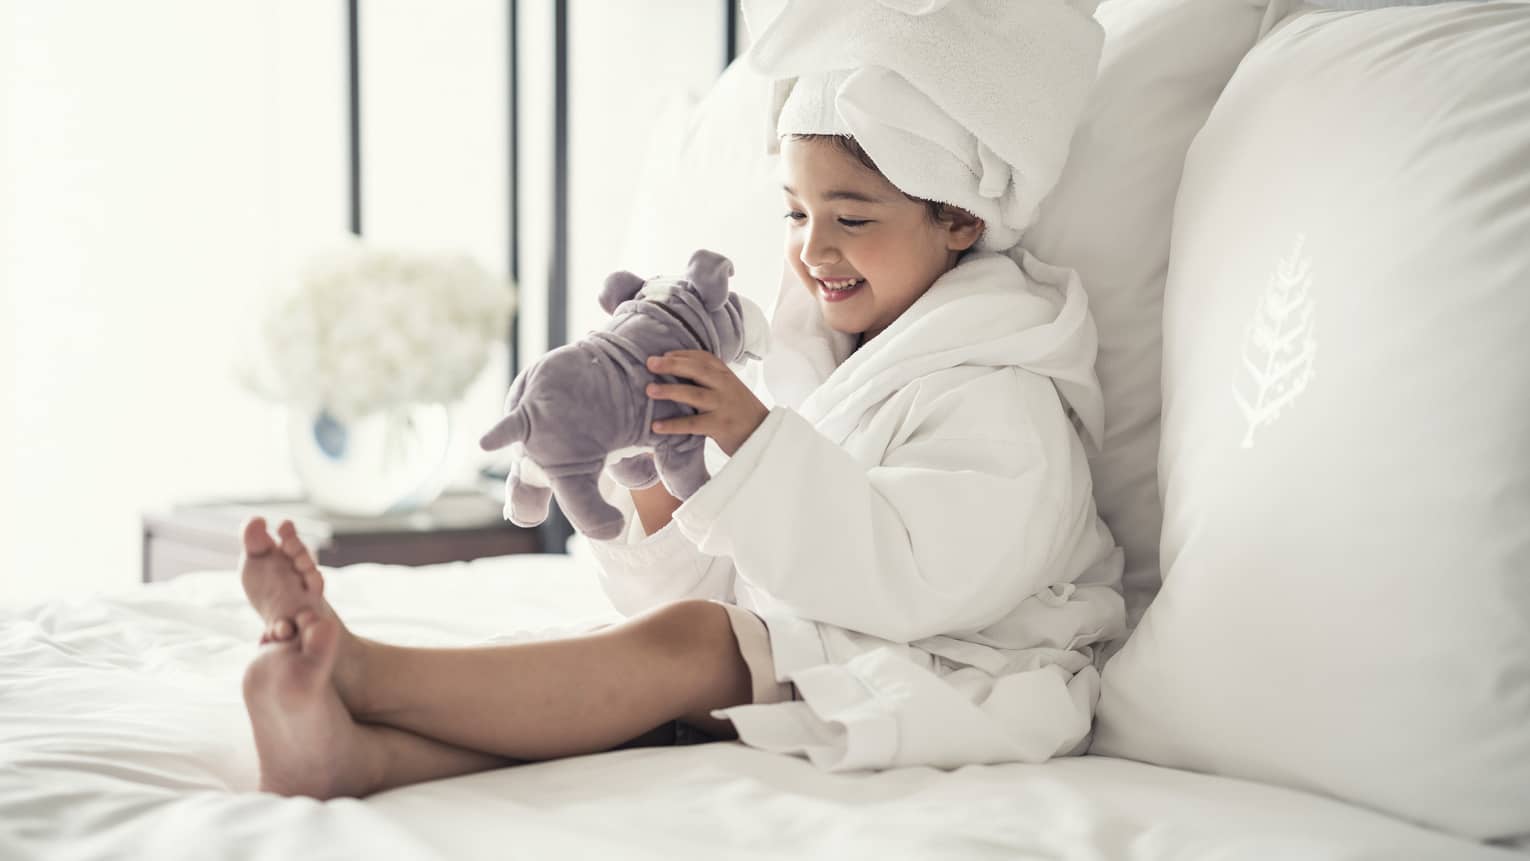 Young girl wearing a white bathrobe with towel wrap plays with plush dog toy on bed